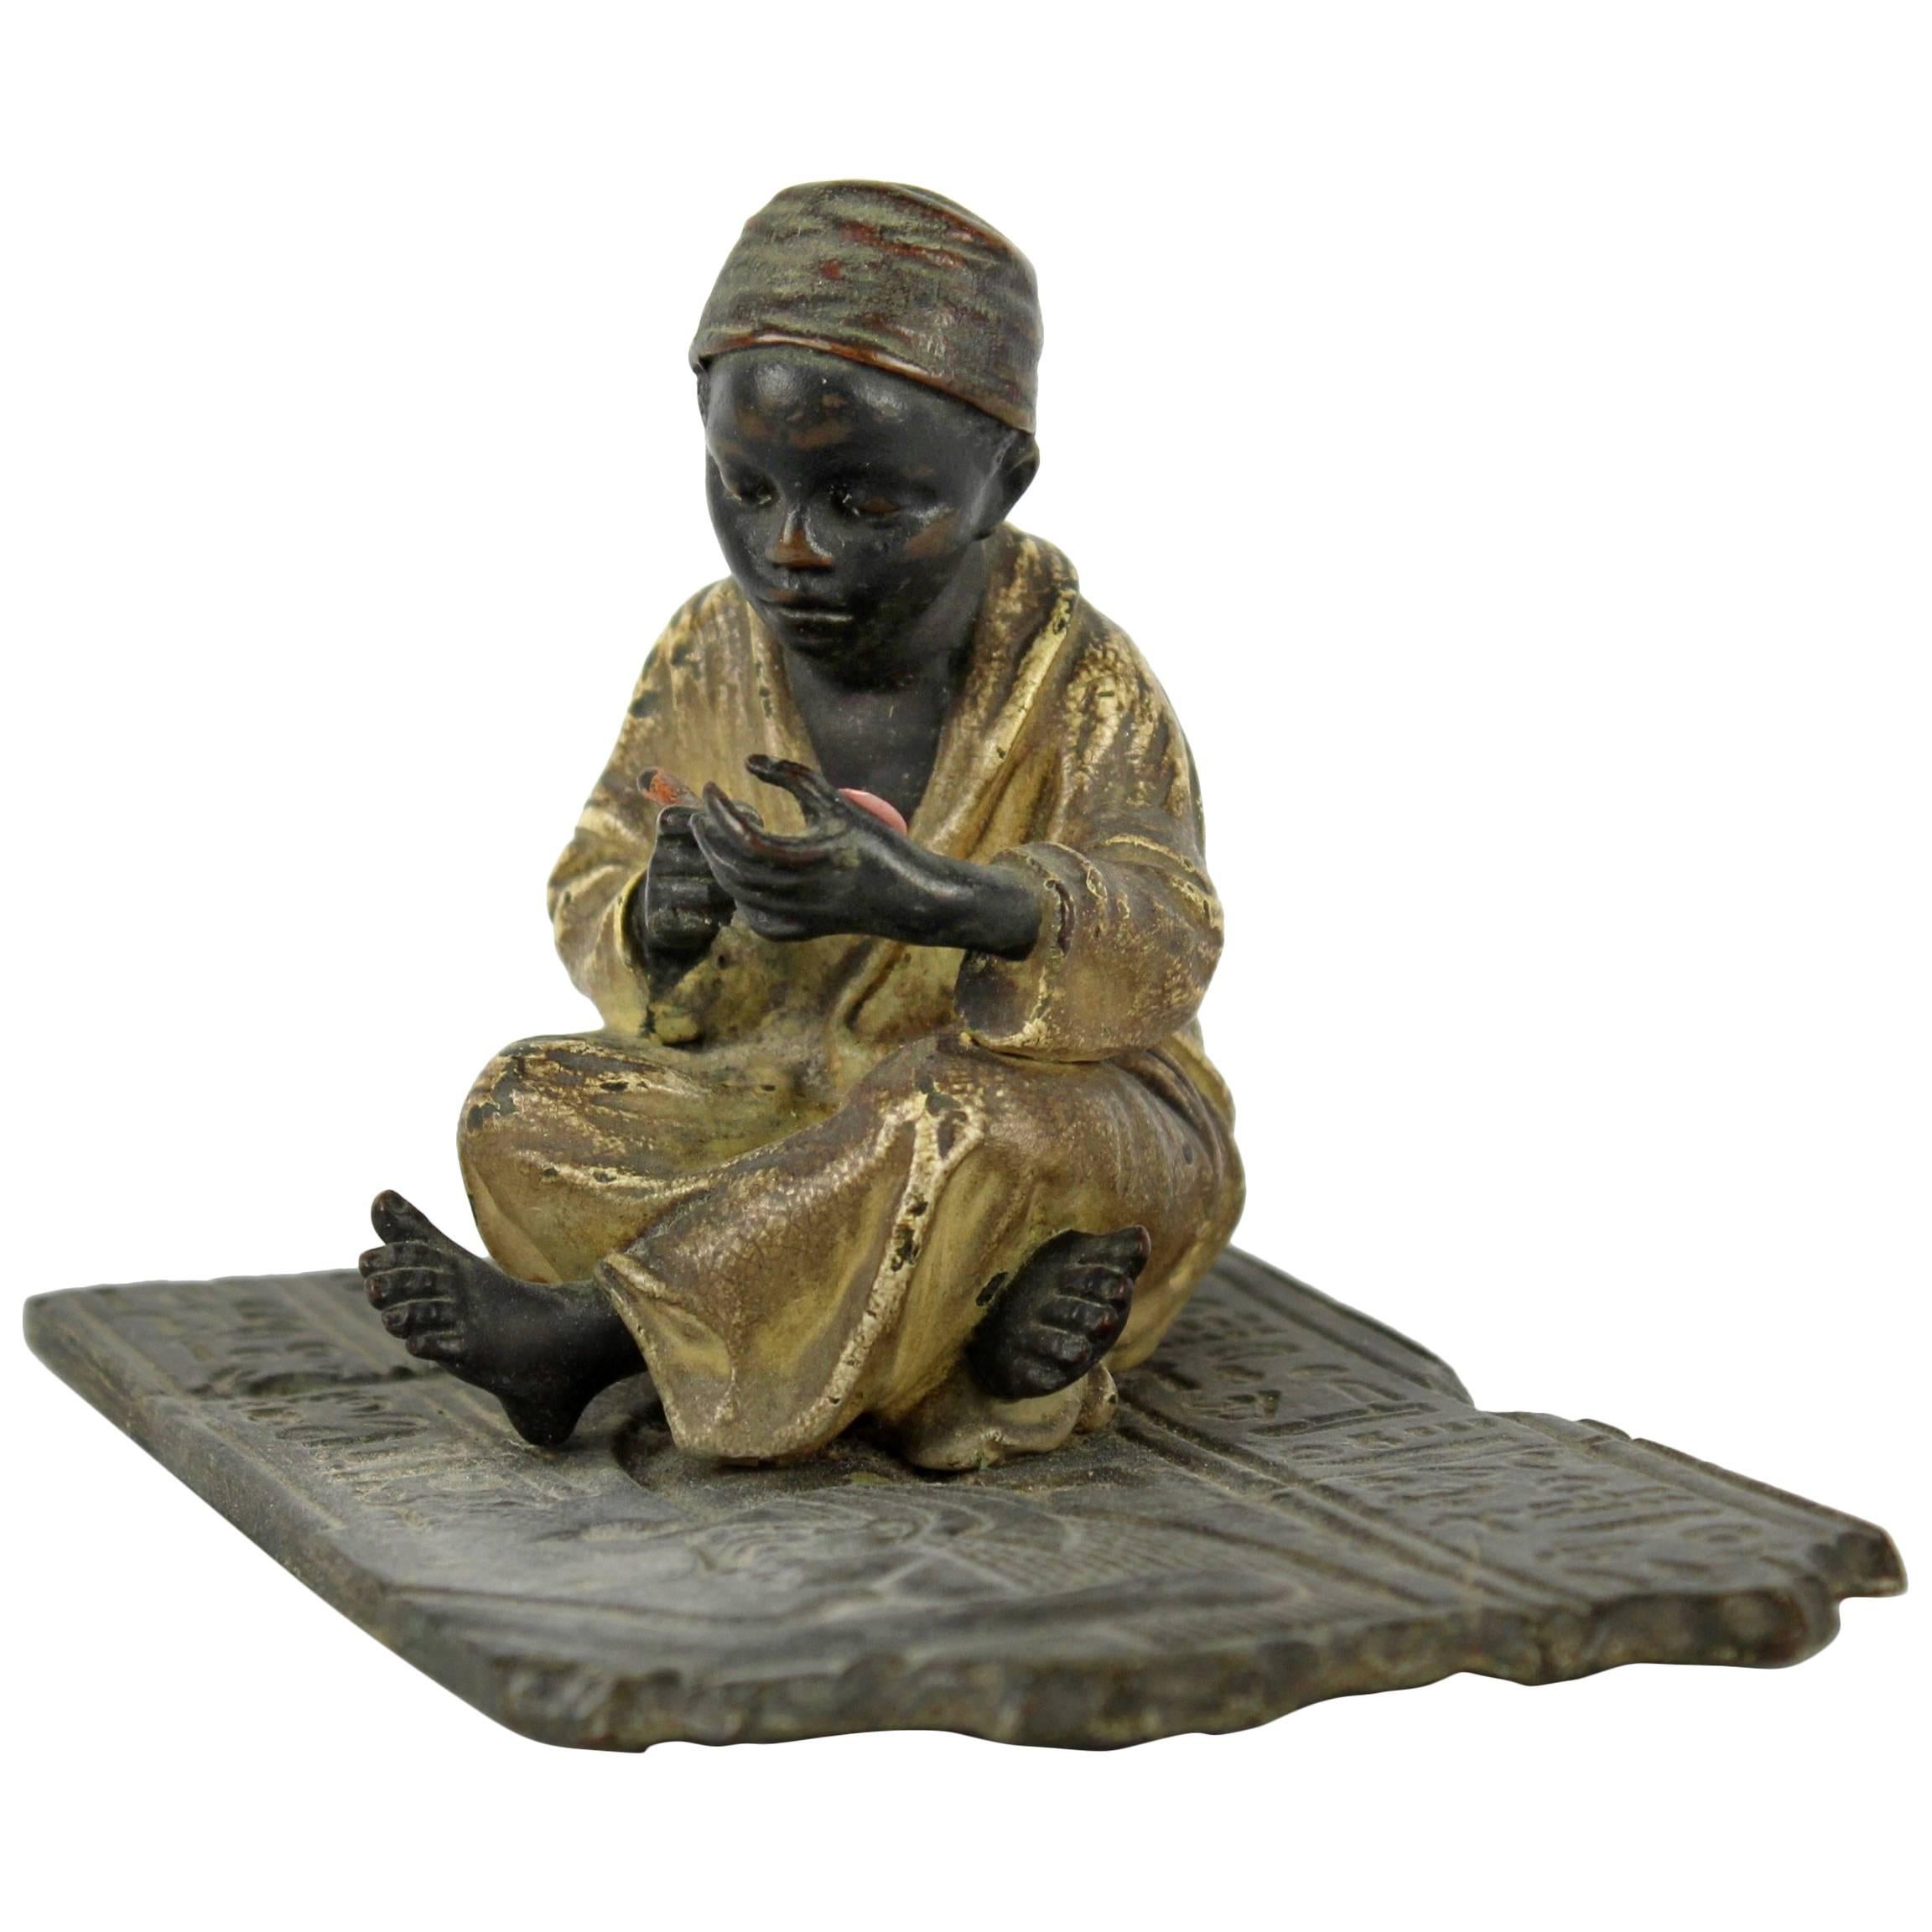 Cold Painted Orientalist Bronze Sculpture of a Seated Arab Boy by F. Bergmann